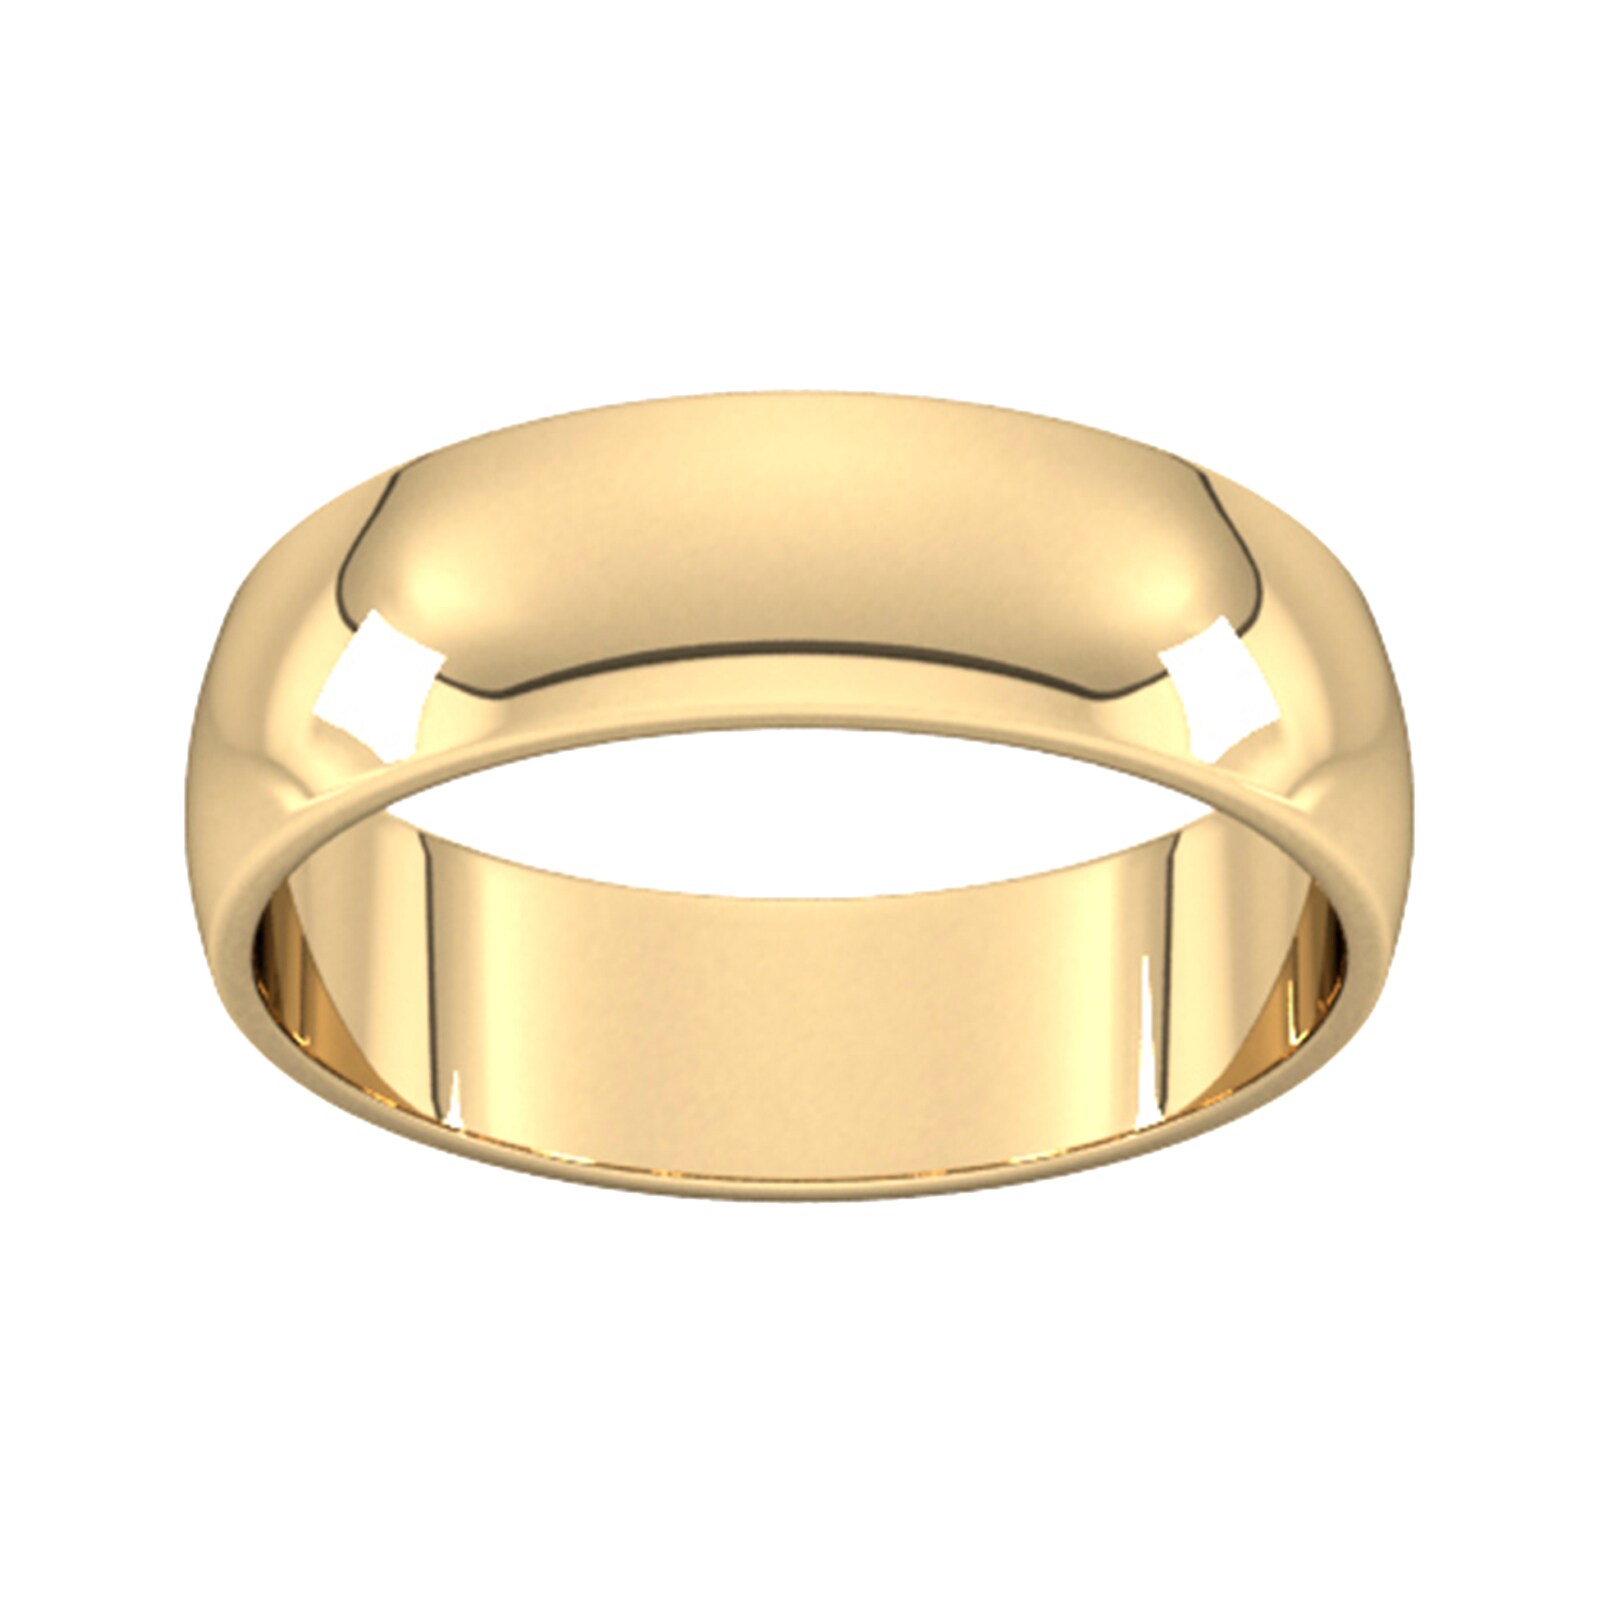 Goldsmiths 6mm D Shape Standard Wedding Ring In 18 Carat Yellow Gold - Ring Size V GSDL 6mm 